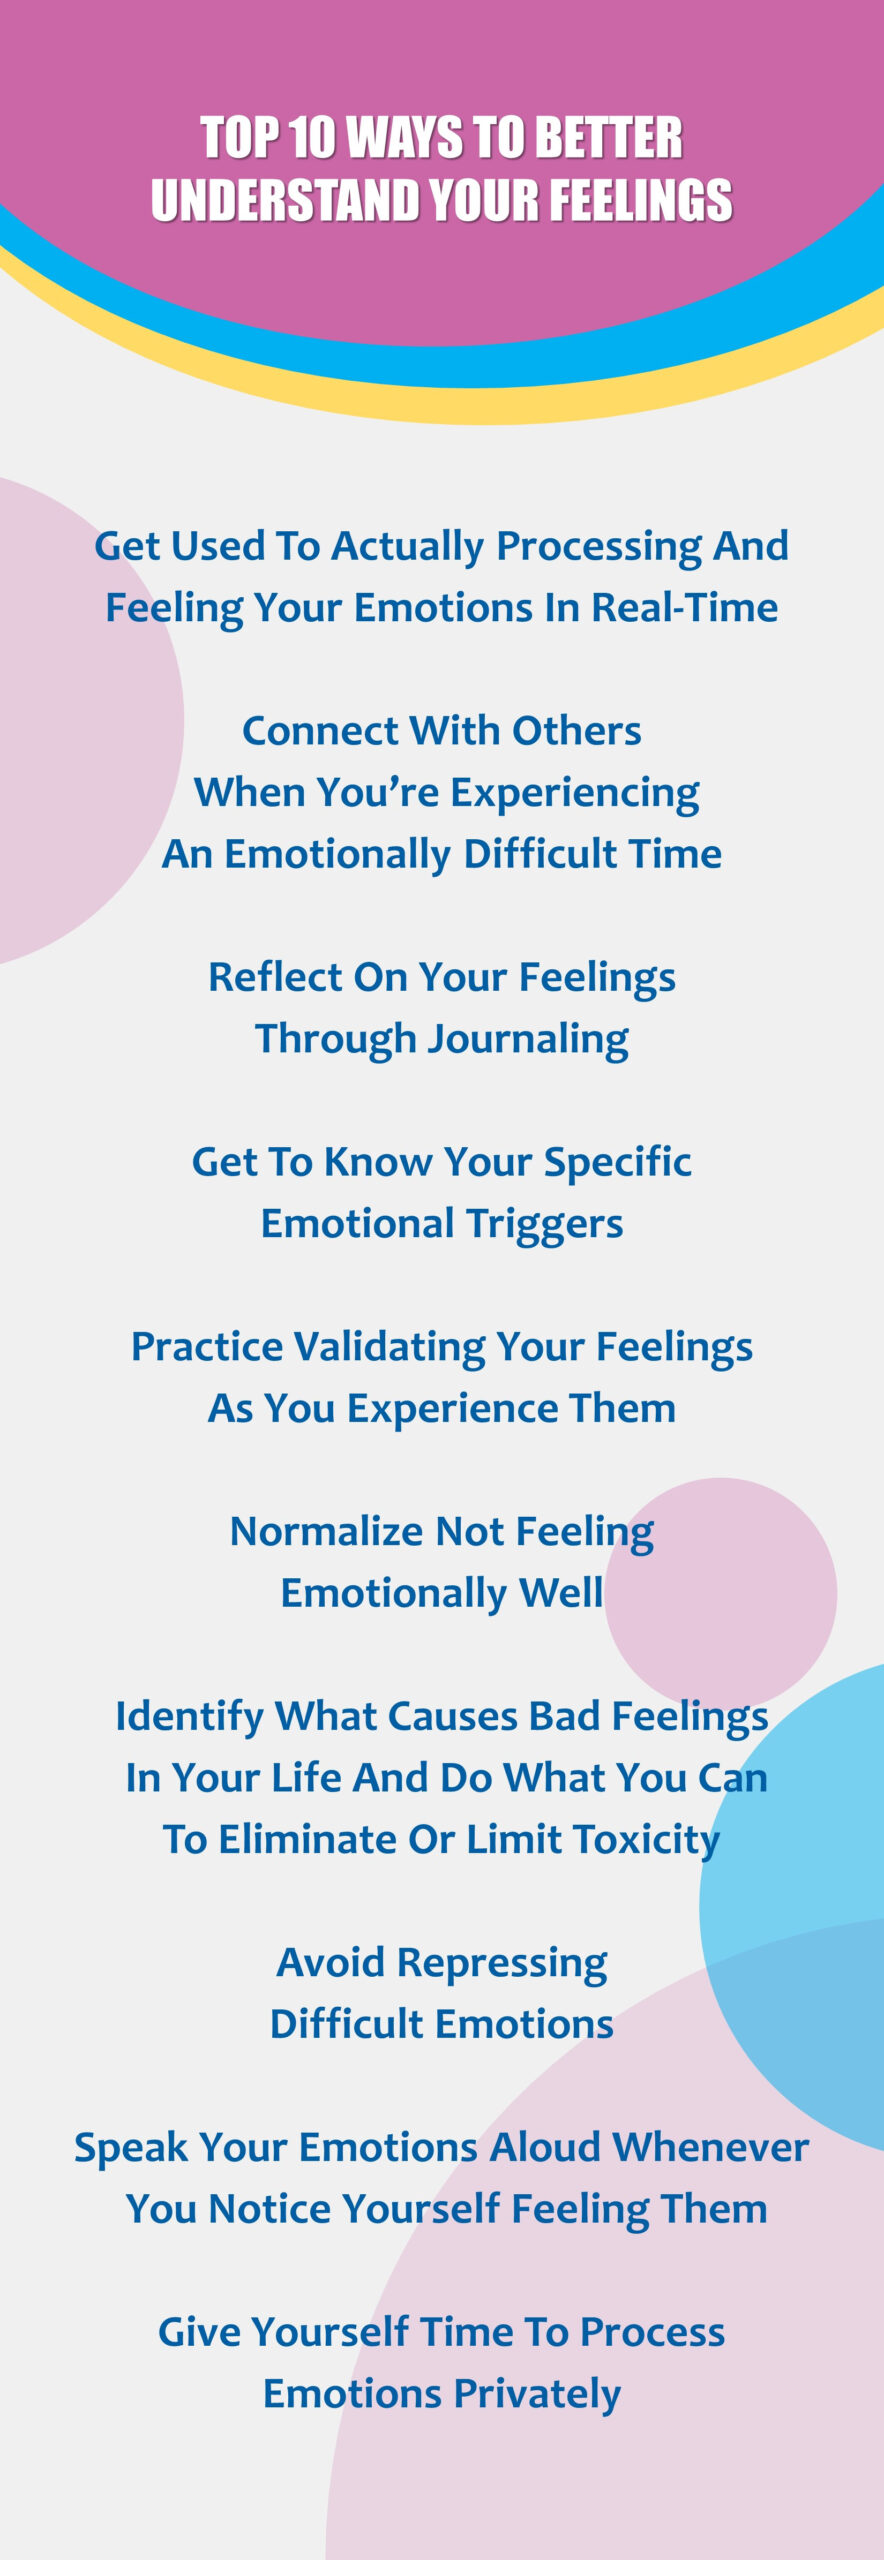 Ways to better understand your feelings.